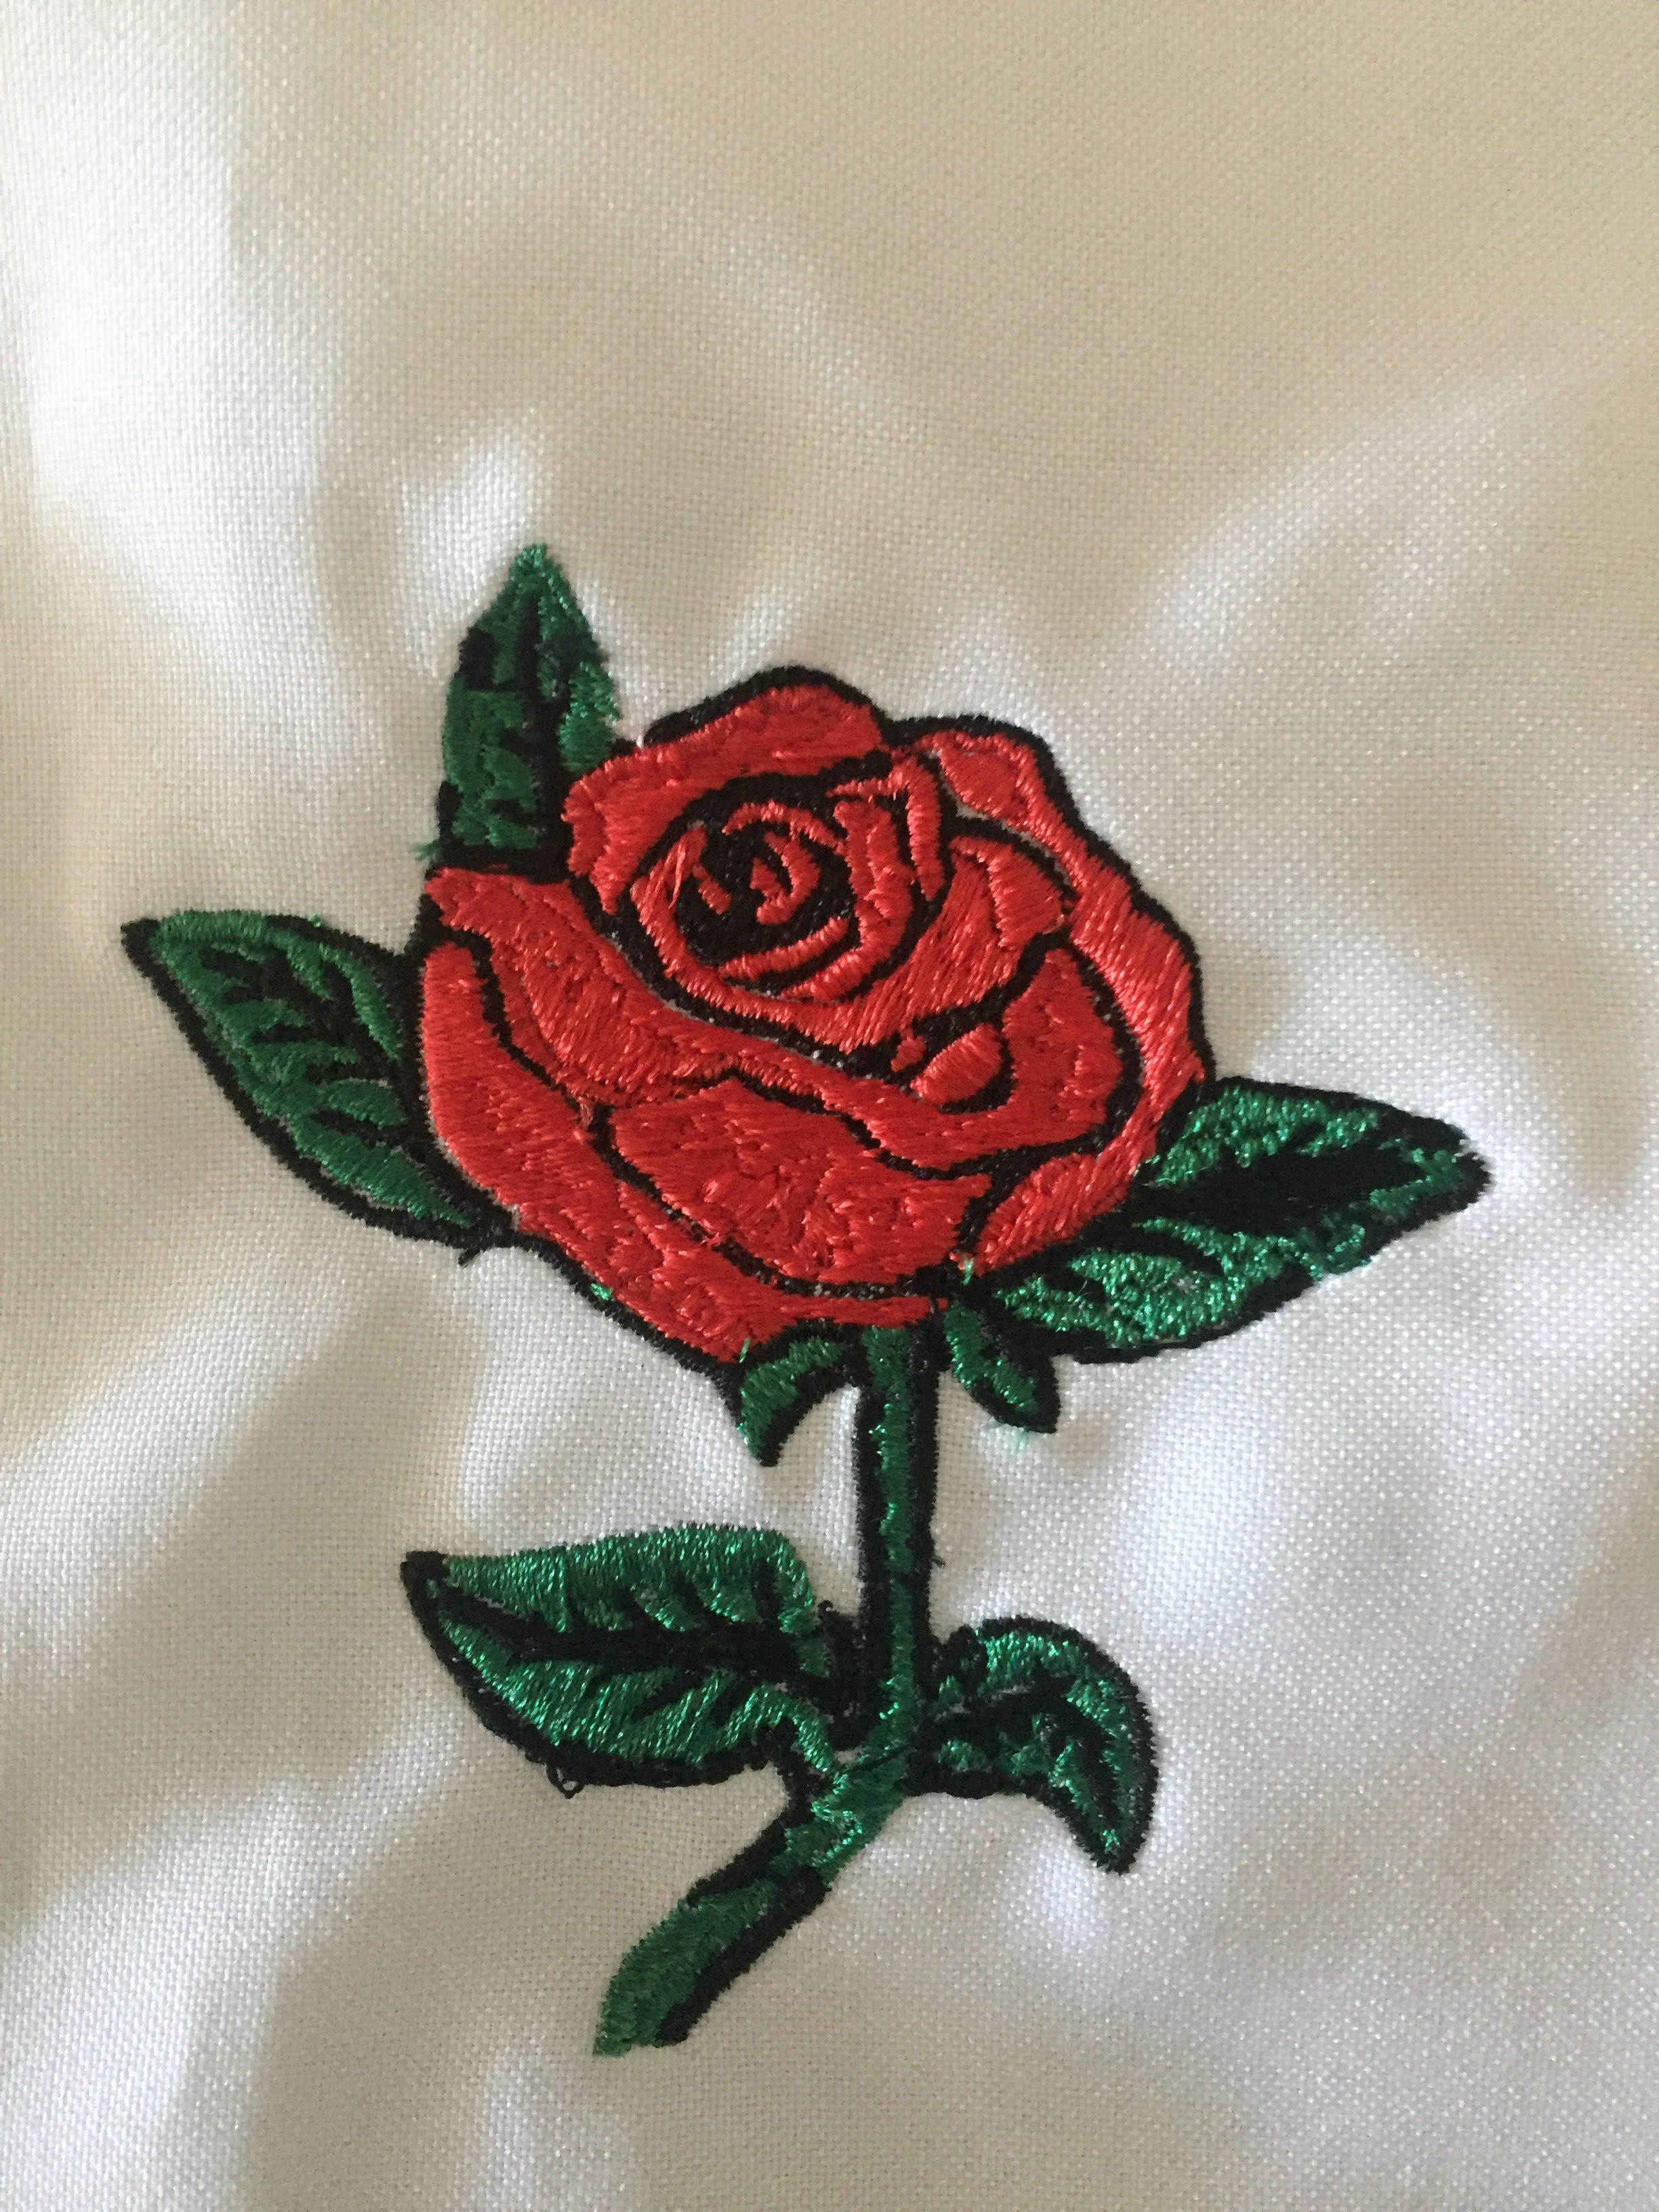 Embroidered rose stem and leaves